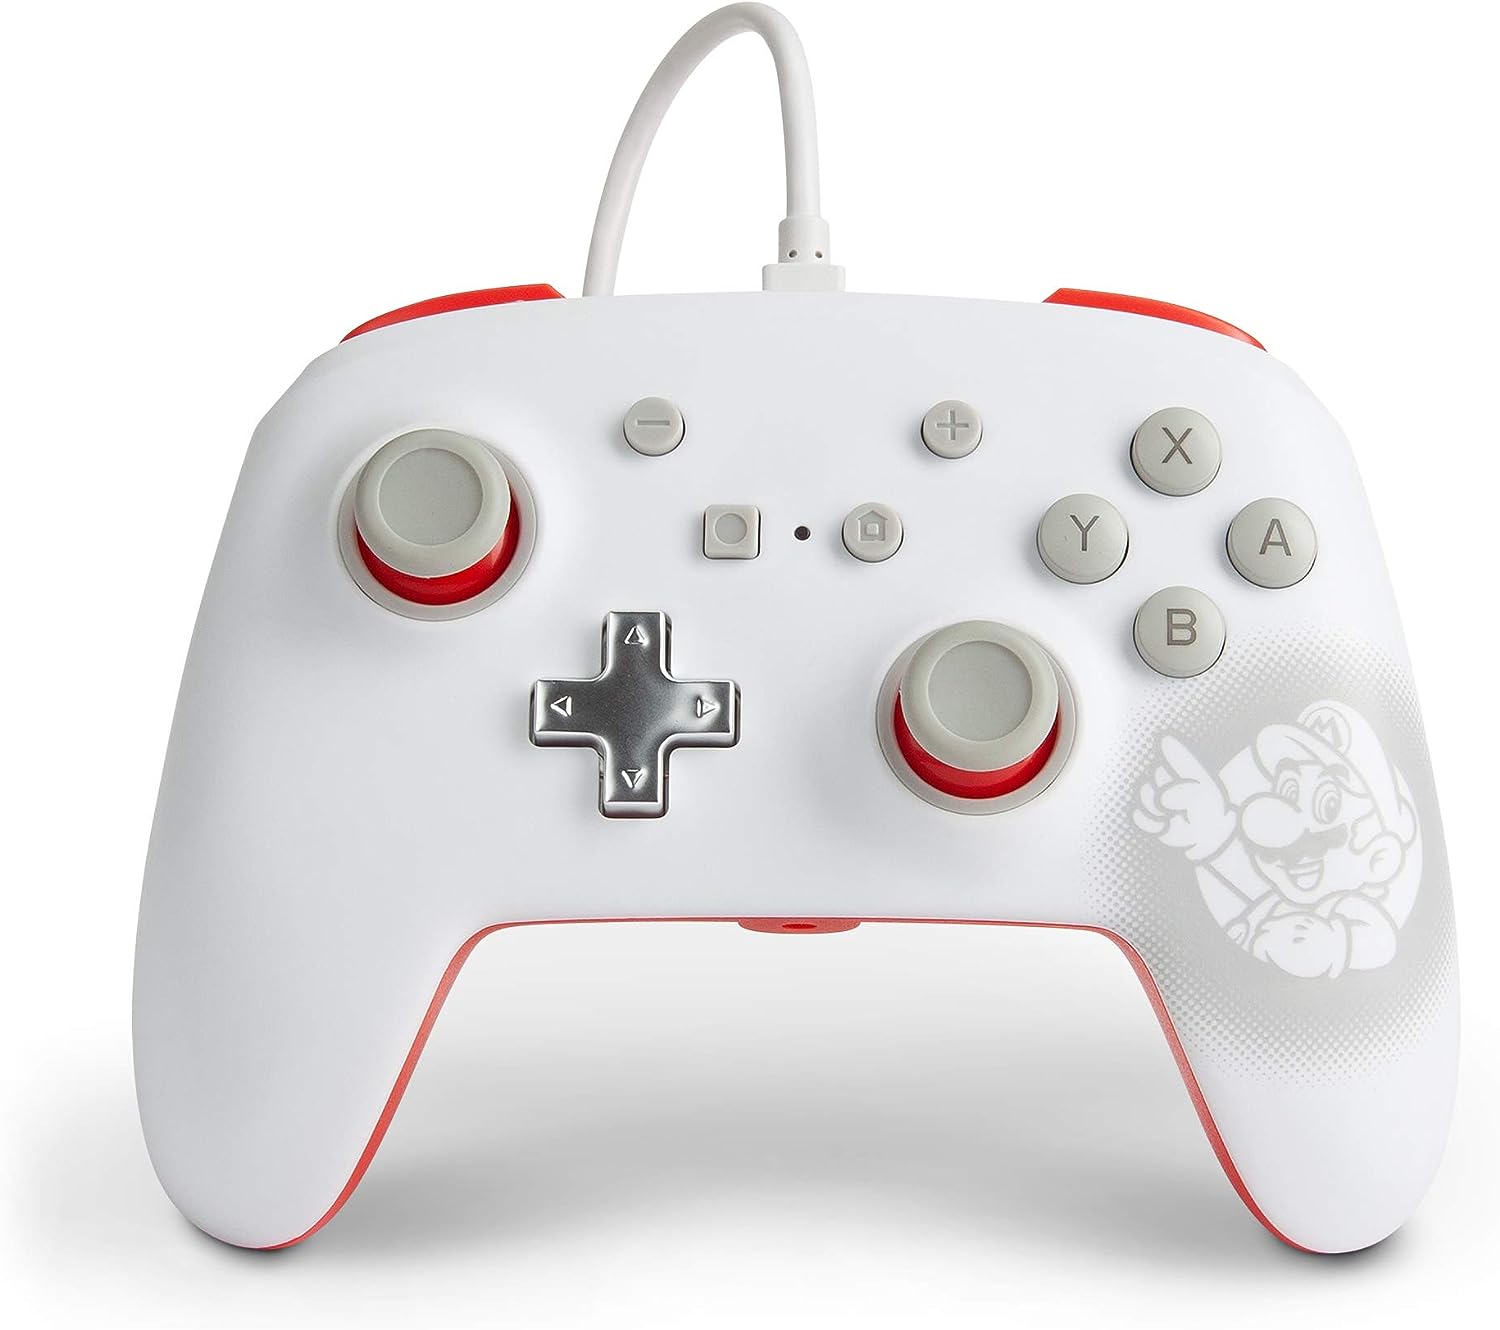 PowerA Mario Enhanced Wired Controller for Switch - Red/White